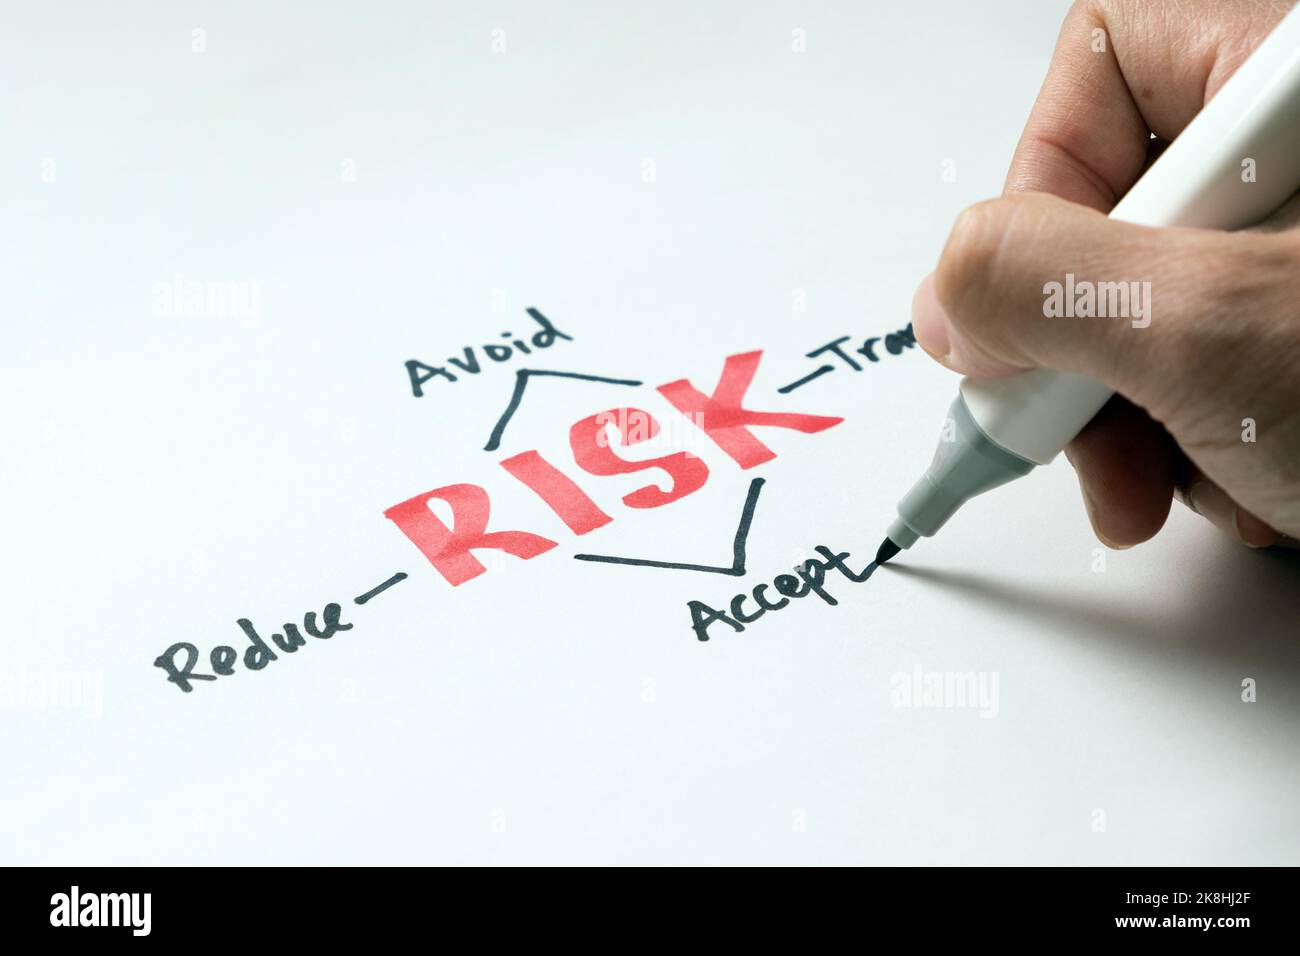 Risk management concept avoid, accept, reduce or transfer Stock Photo